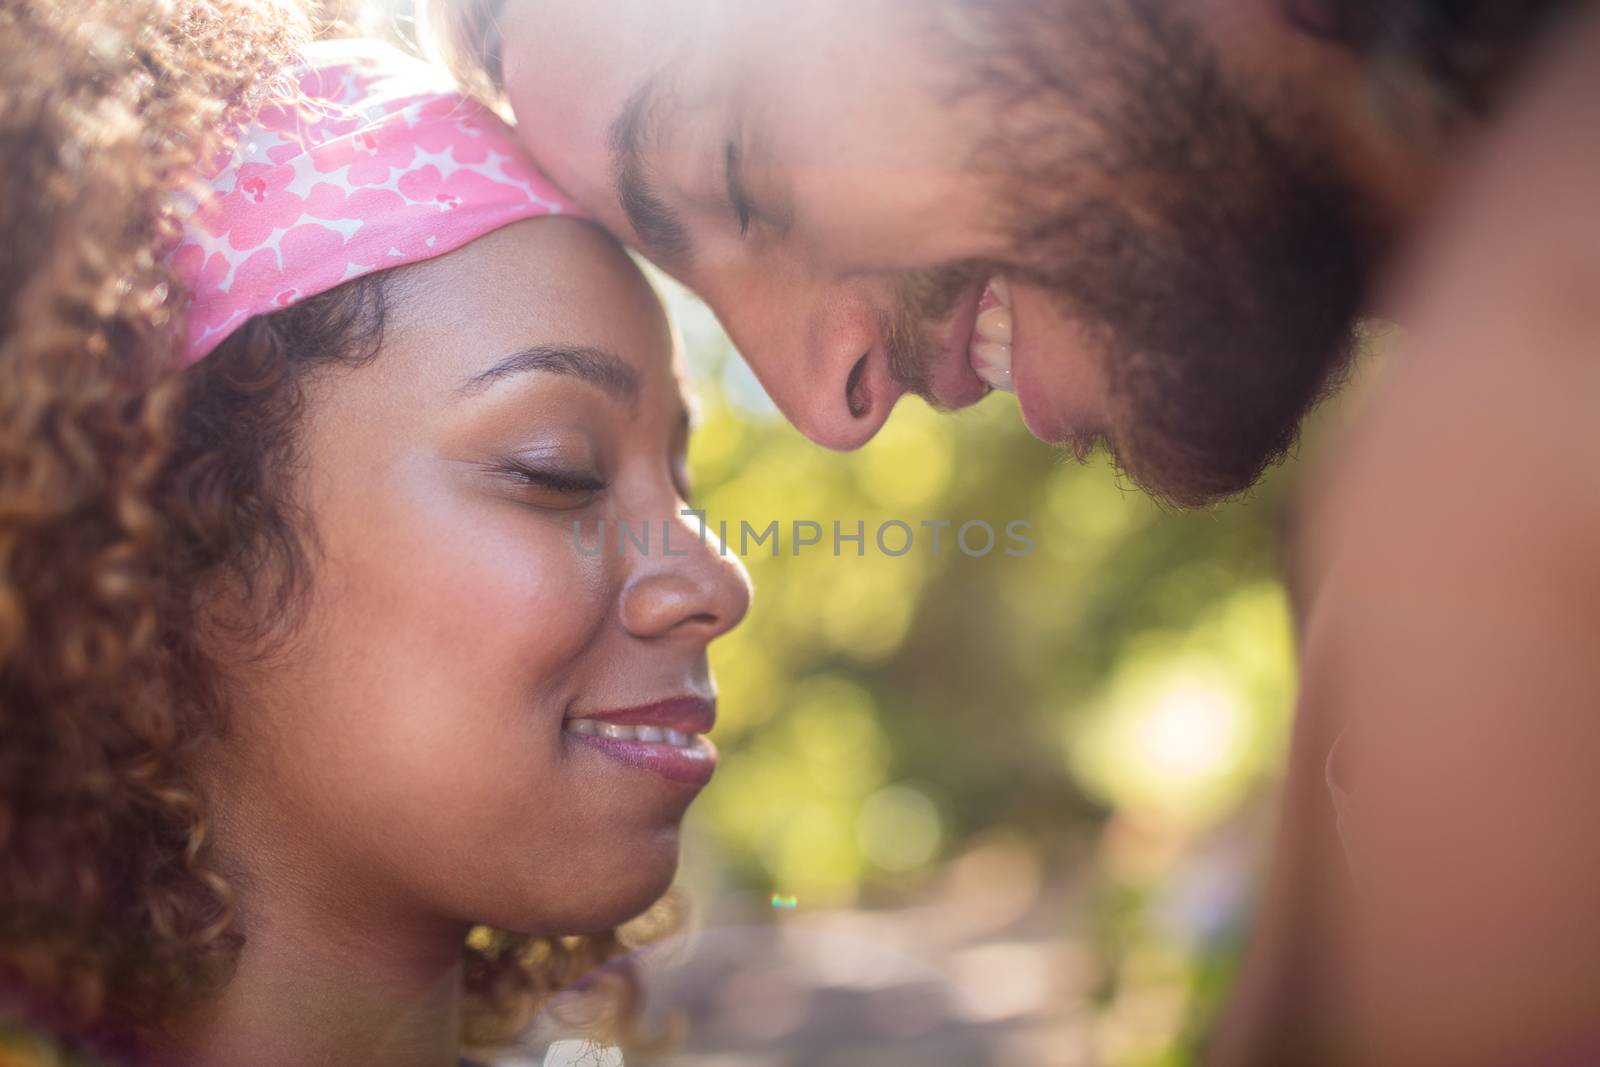 Romantic couple embracing each other with eyes closed in park on a sunny day